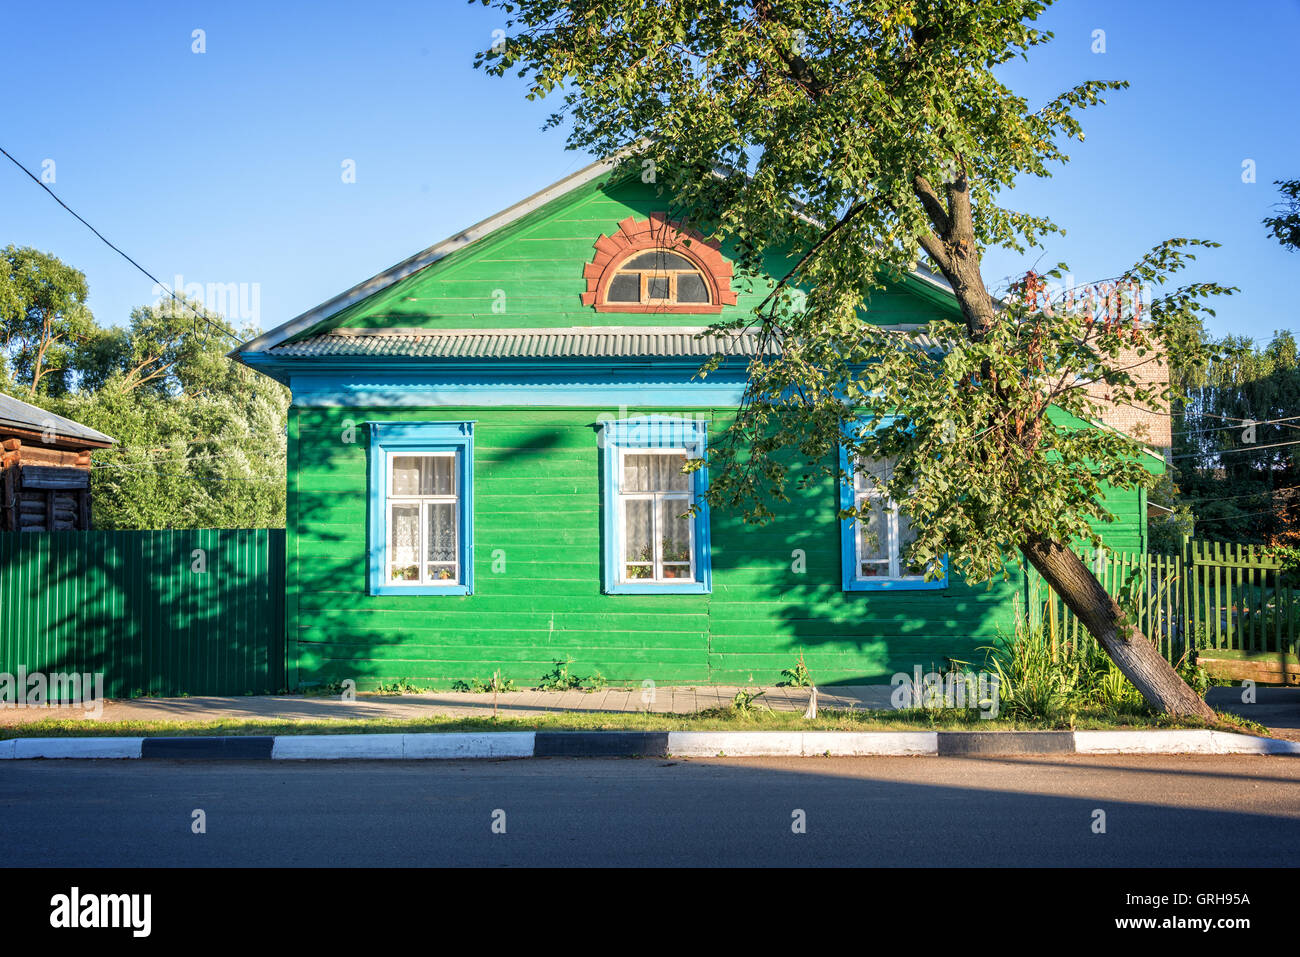 Colorful traditional wooden house in Rostov, Golden ring, Russia Stock Photo